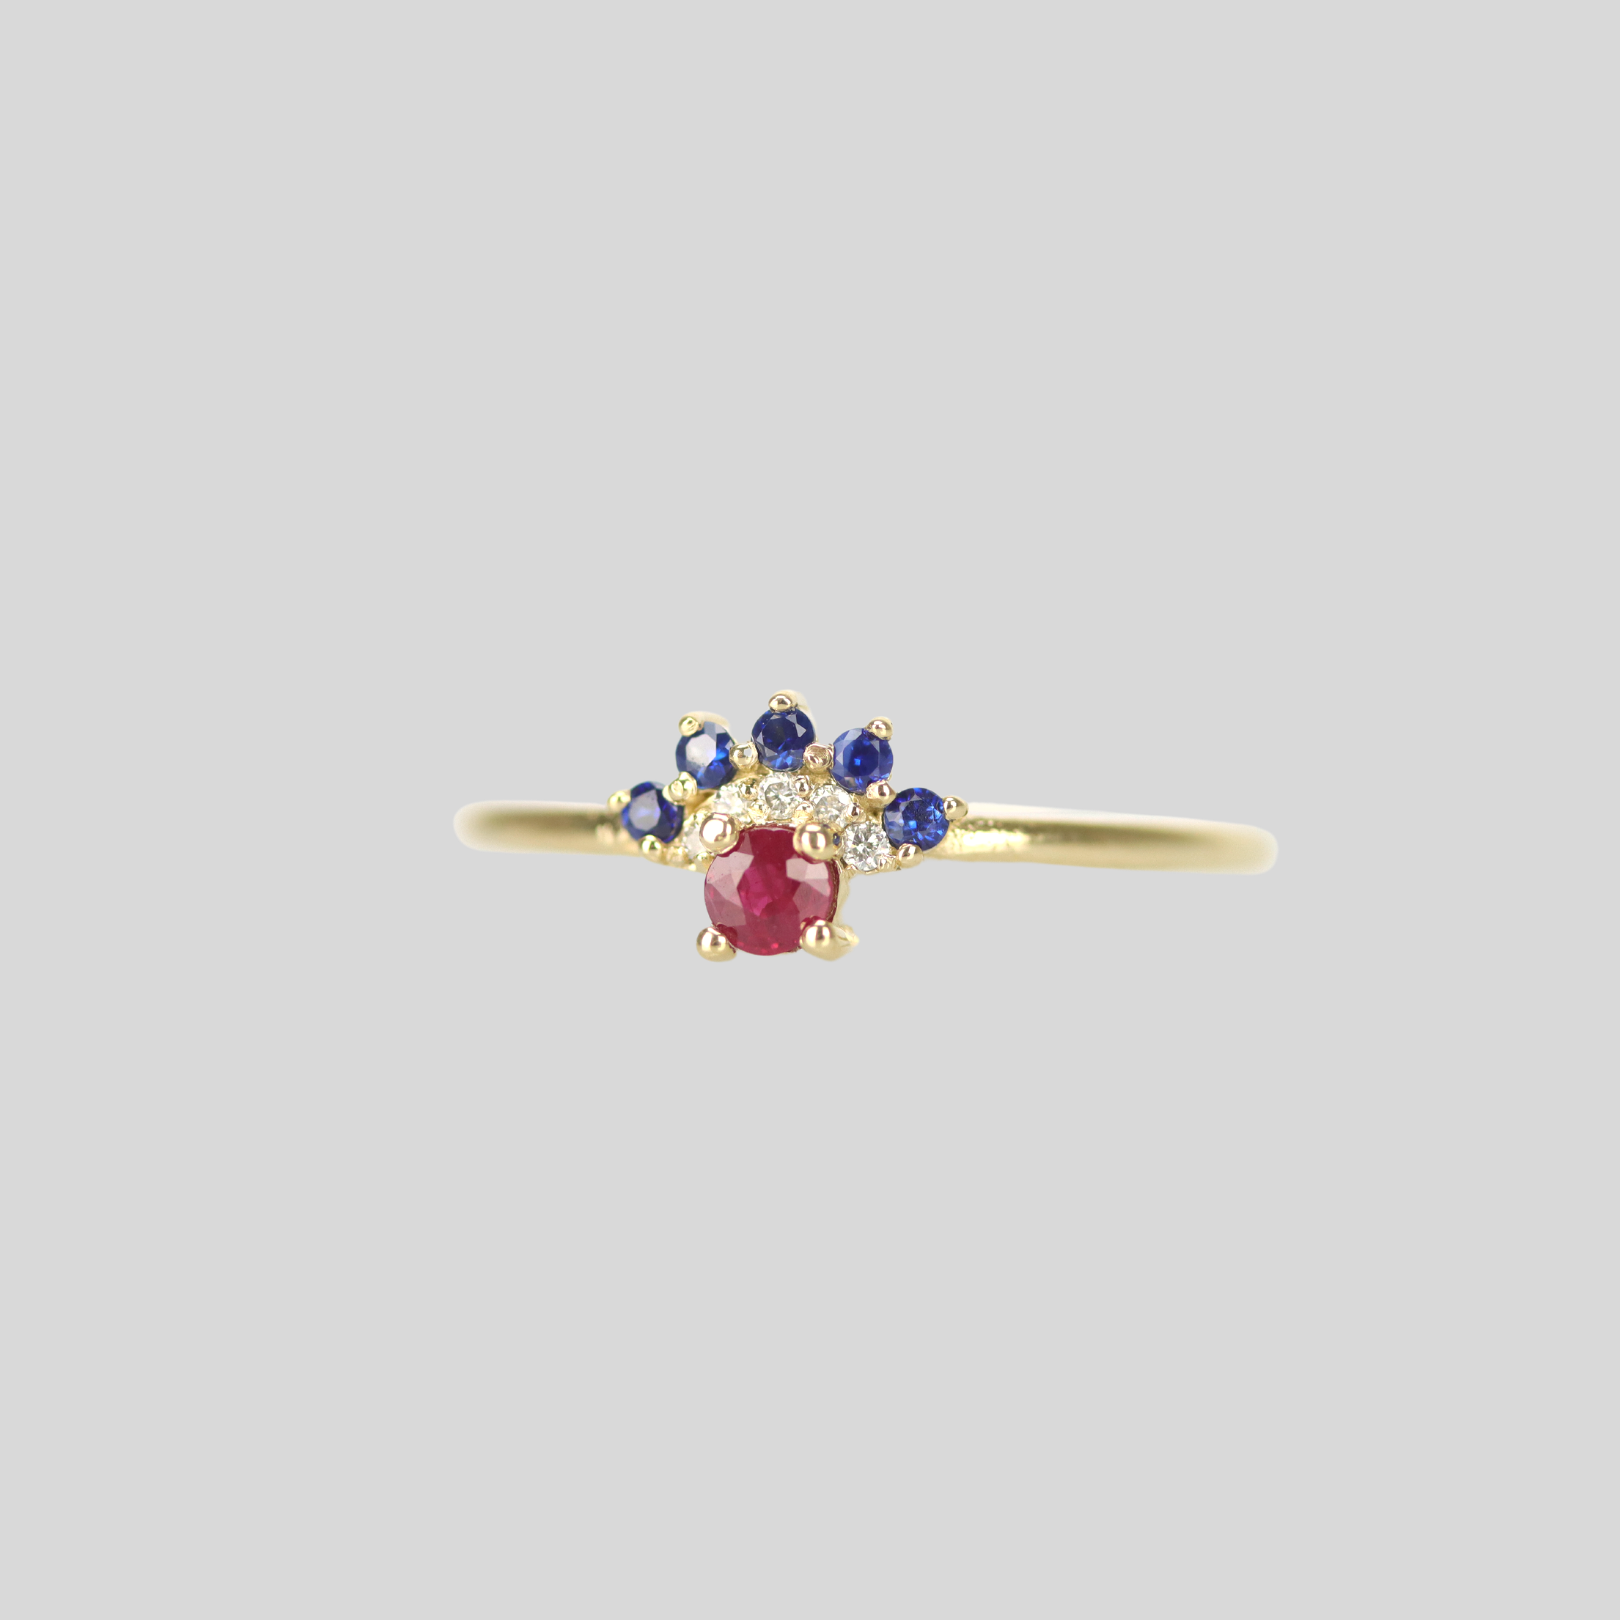 Solid 14k gold fan ring with ruby, sapphire and diamond